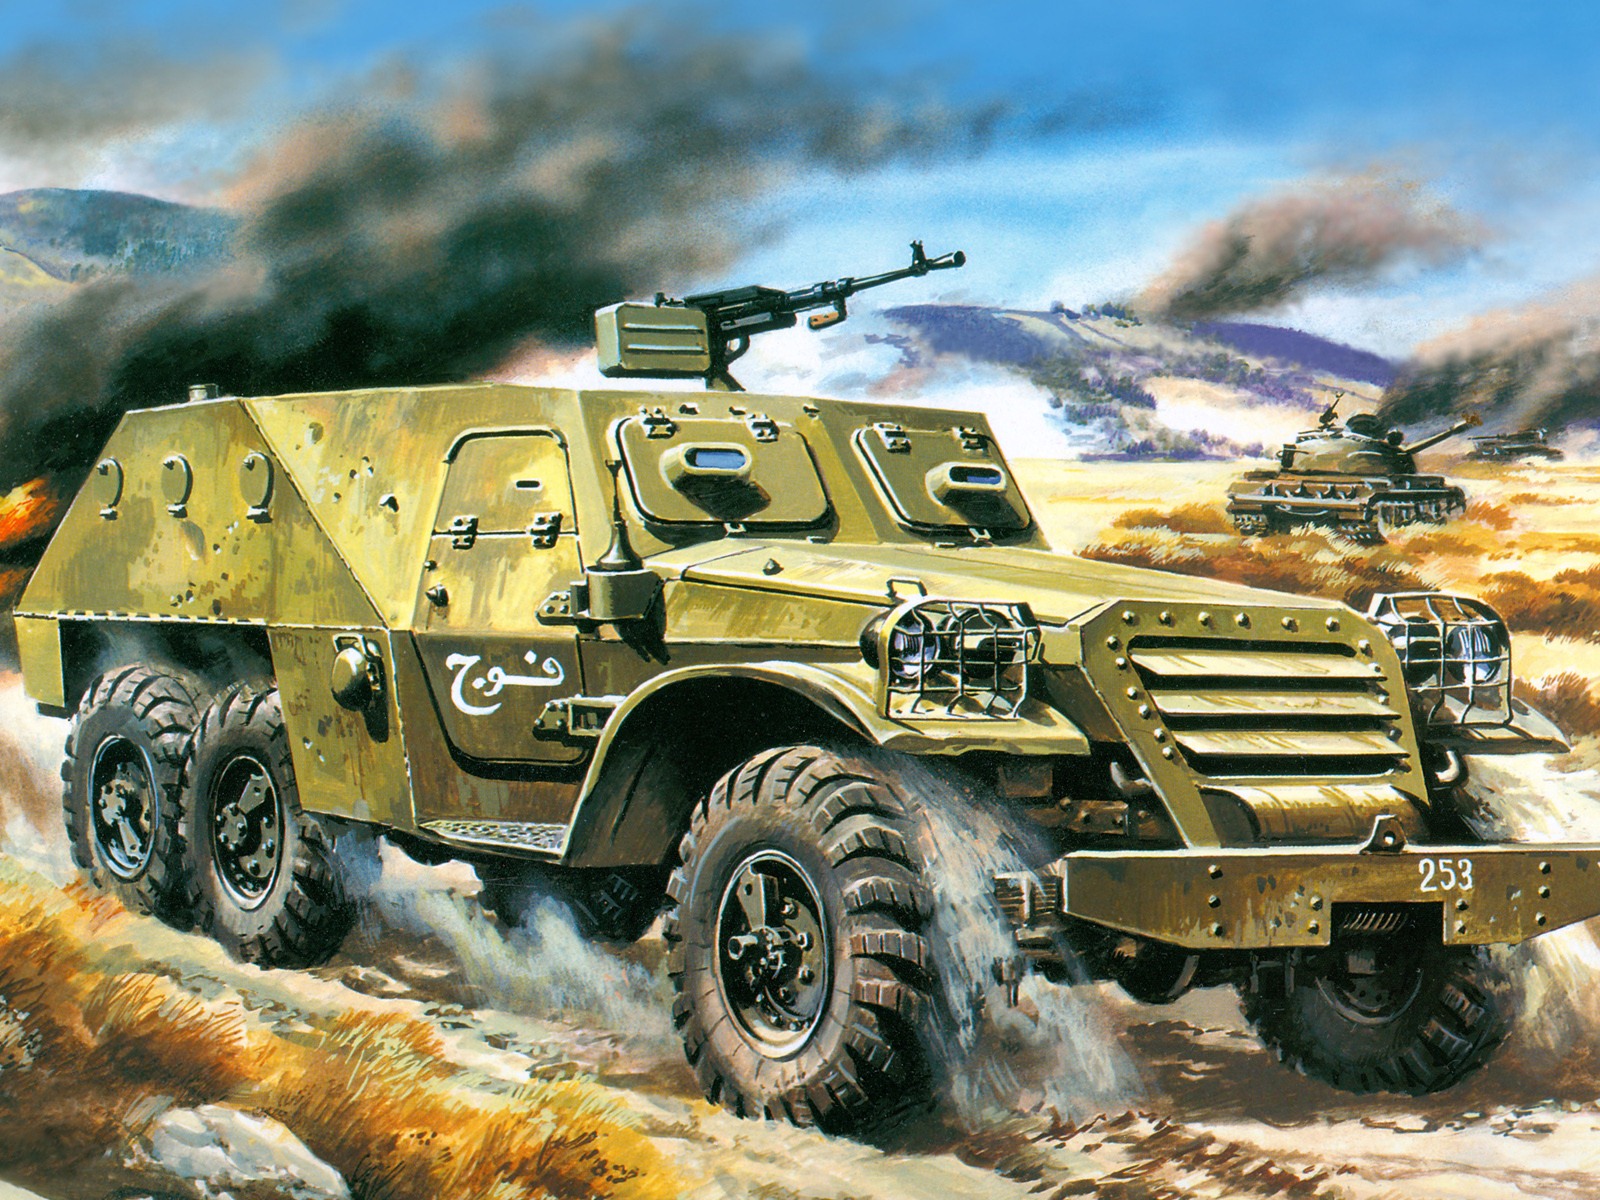 Military tanks, armored HD painting wallpapers #17 - 1600x1200